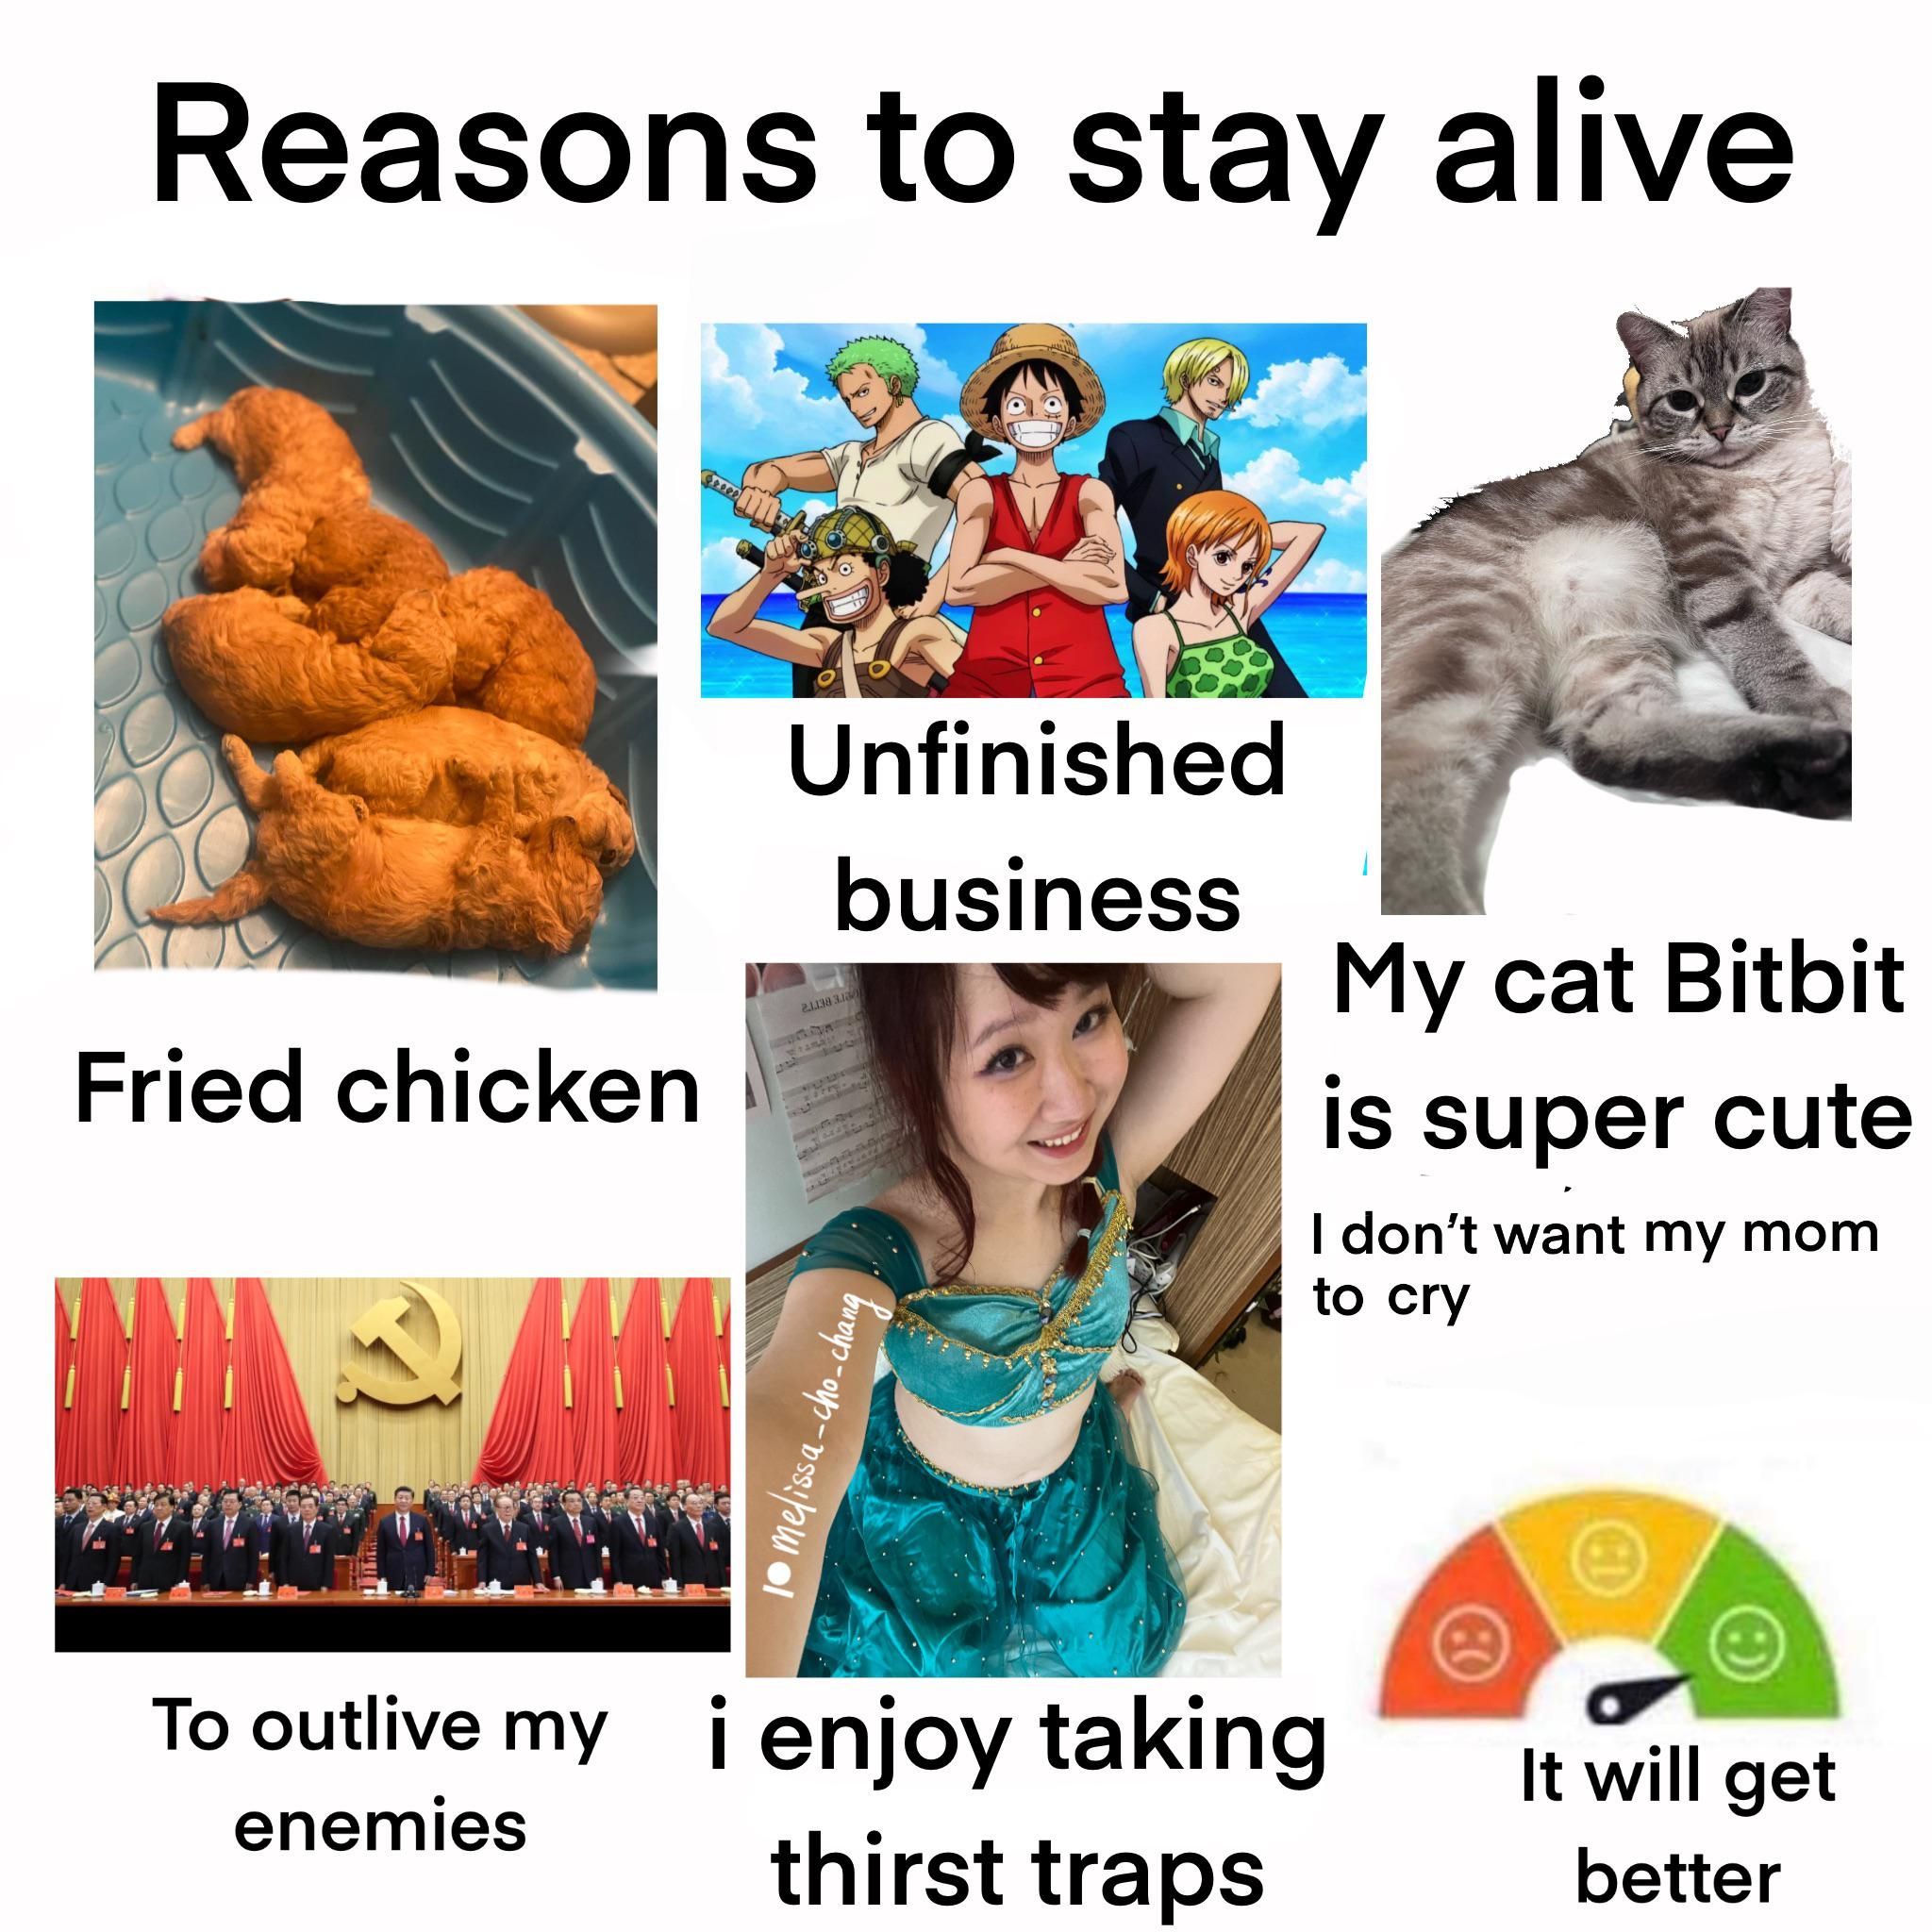 Reasons I’m staying alive